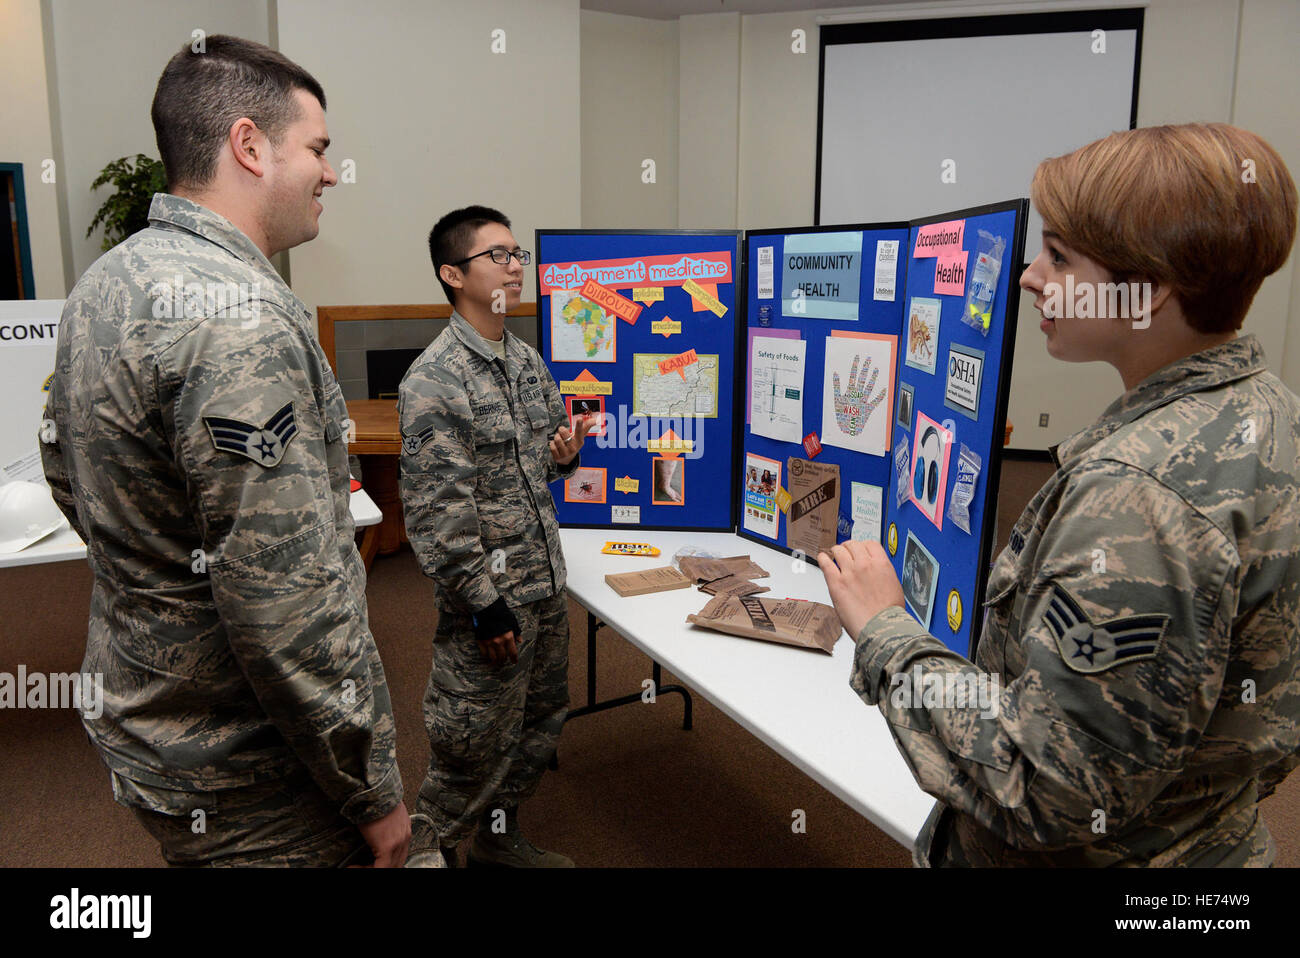 U.S. Air Force Senior Airman Rachel Pavlich, 97th Medical Operations Squadron public health technician, explains the different sections under public health, such as community health, occupational health, and deployment medicine during the career fair at the Freedom Community Center, March 17, 2015. Community health deals with preventative medicine and food inspections, occupational health deals with safety hazards such as making sure people are wearing their personal protective equipment and deployment medicine ensures personnel are medically cleared to deploy.  Airman 1st Class Megan E. Acs Stock Photo